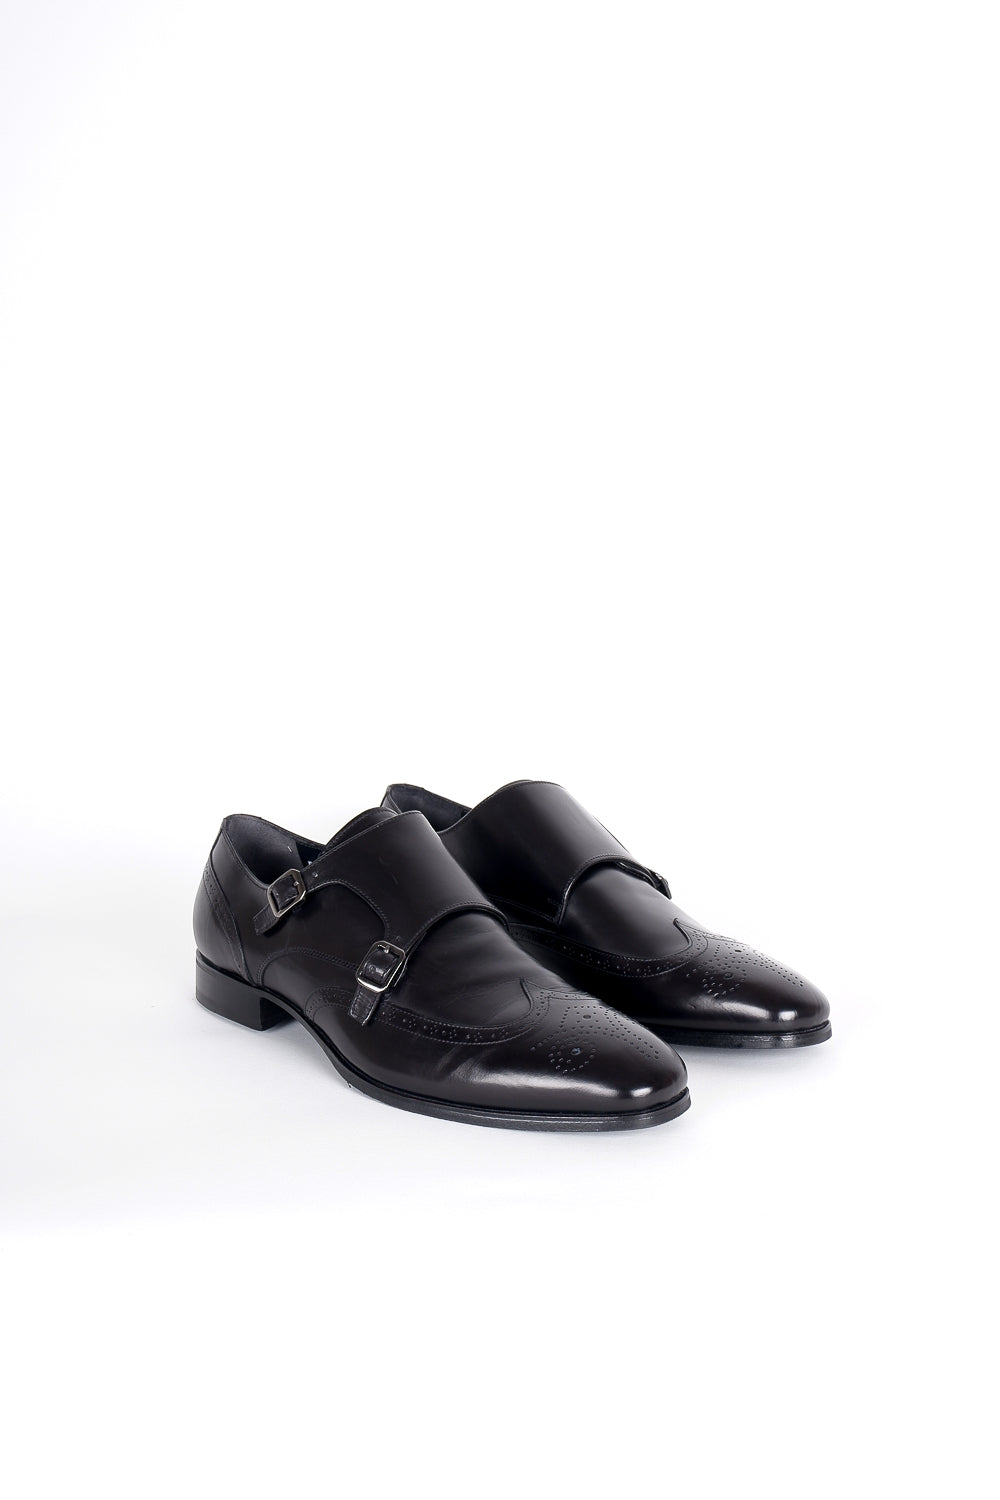 Buy the Sand Copenhagen Classic Double Monk Strap Shoe at Intro at Intro. Spend £50 for free UK delivery. Official stockists. We ship worldwide.